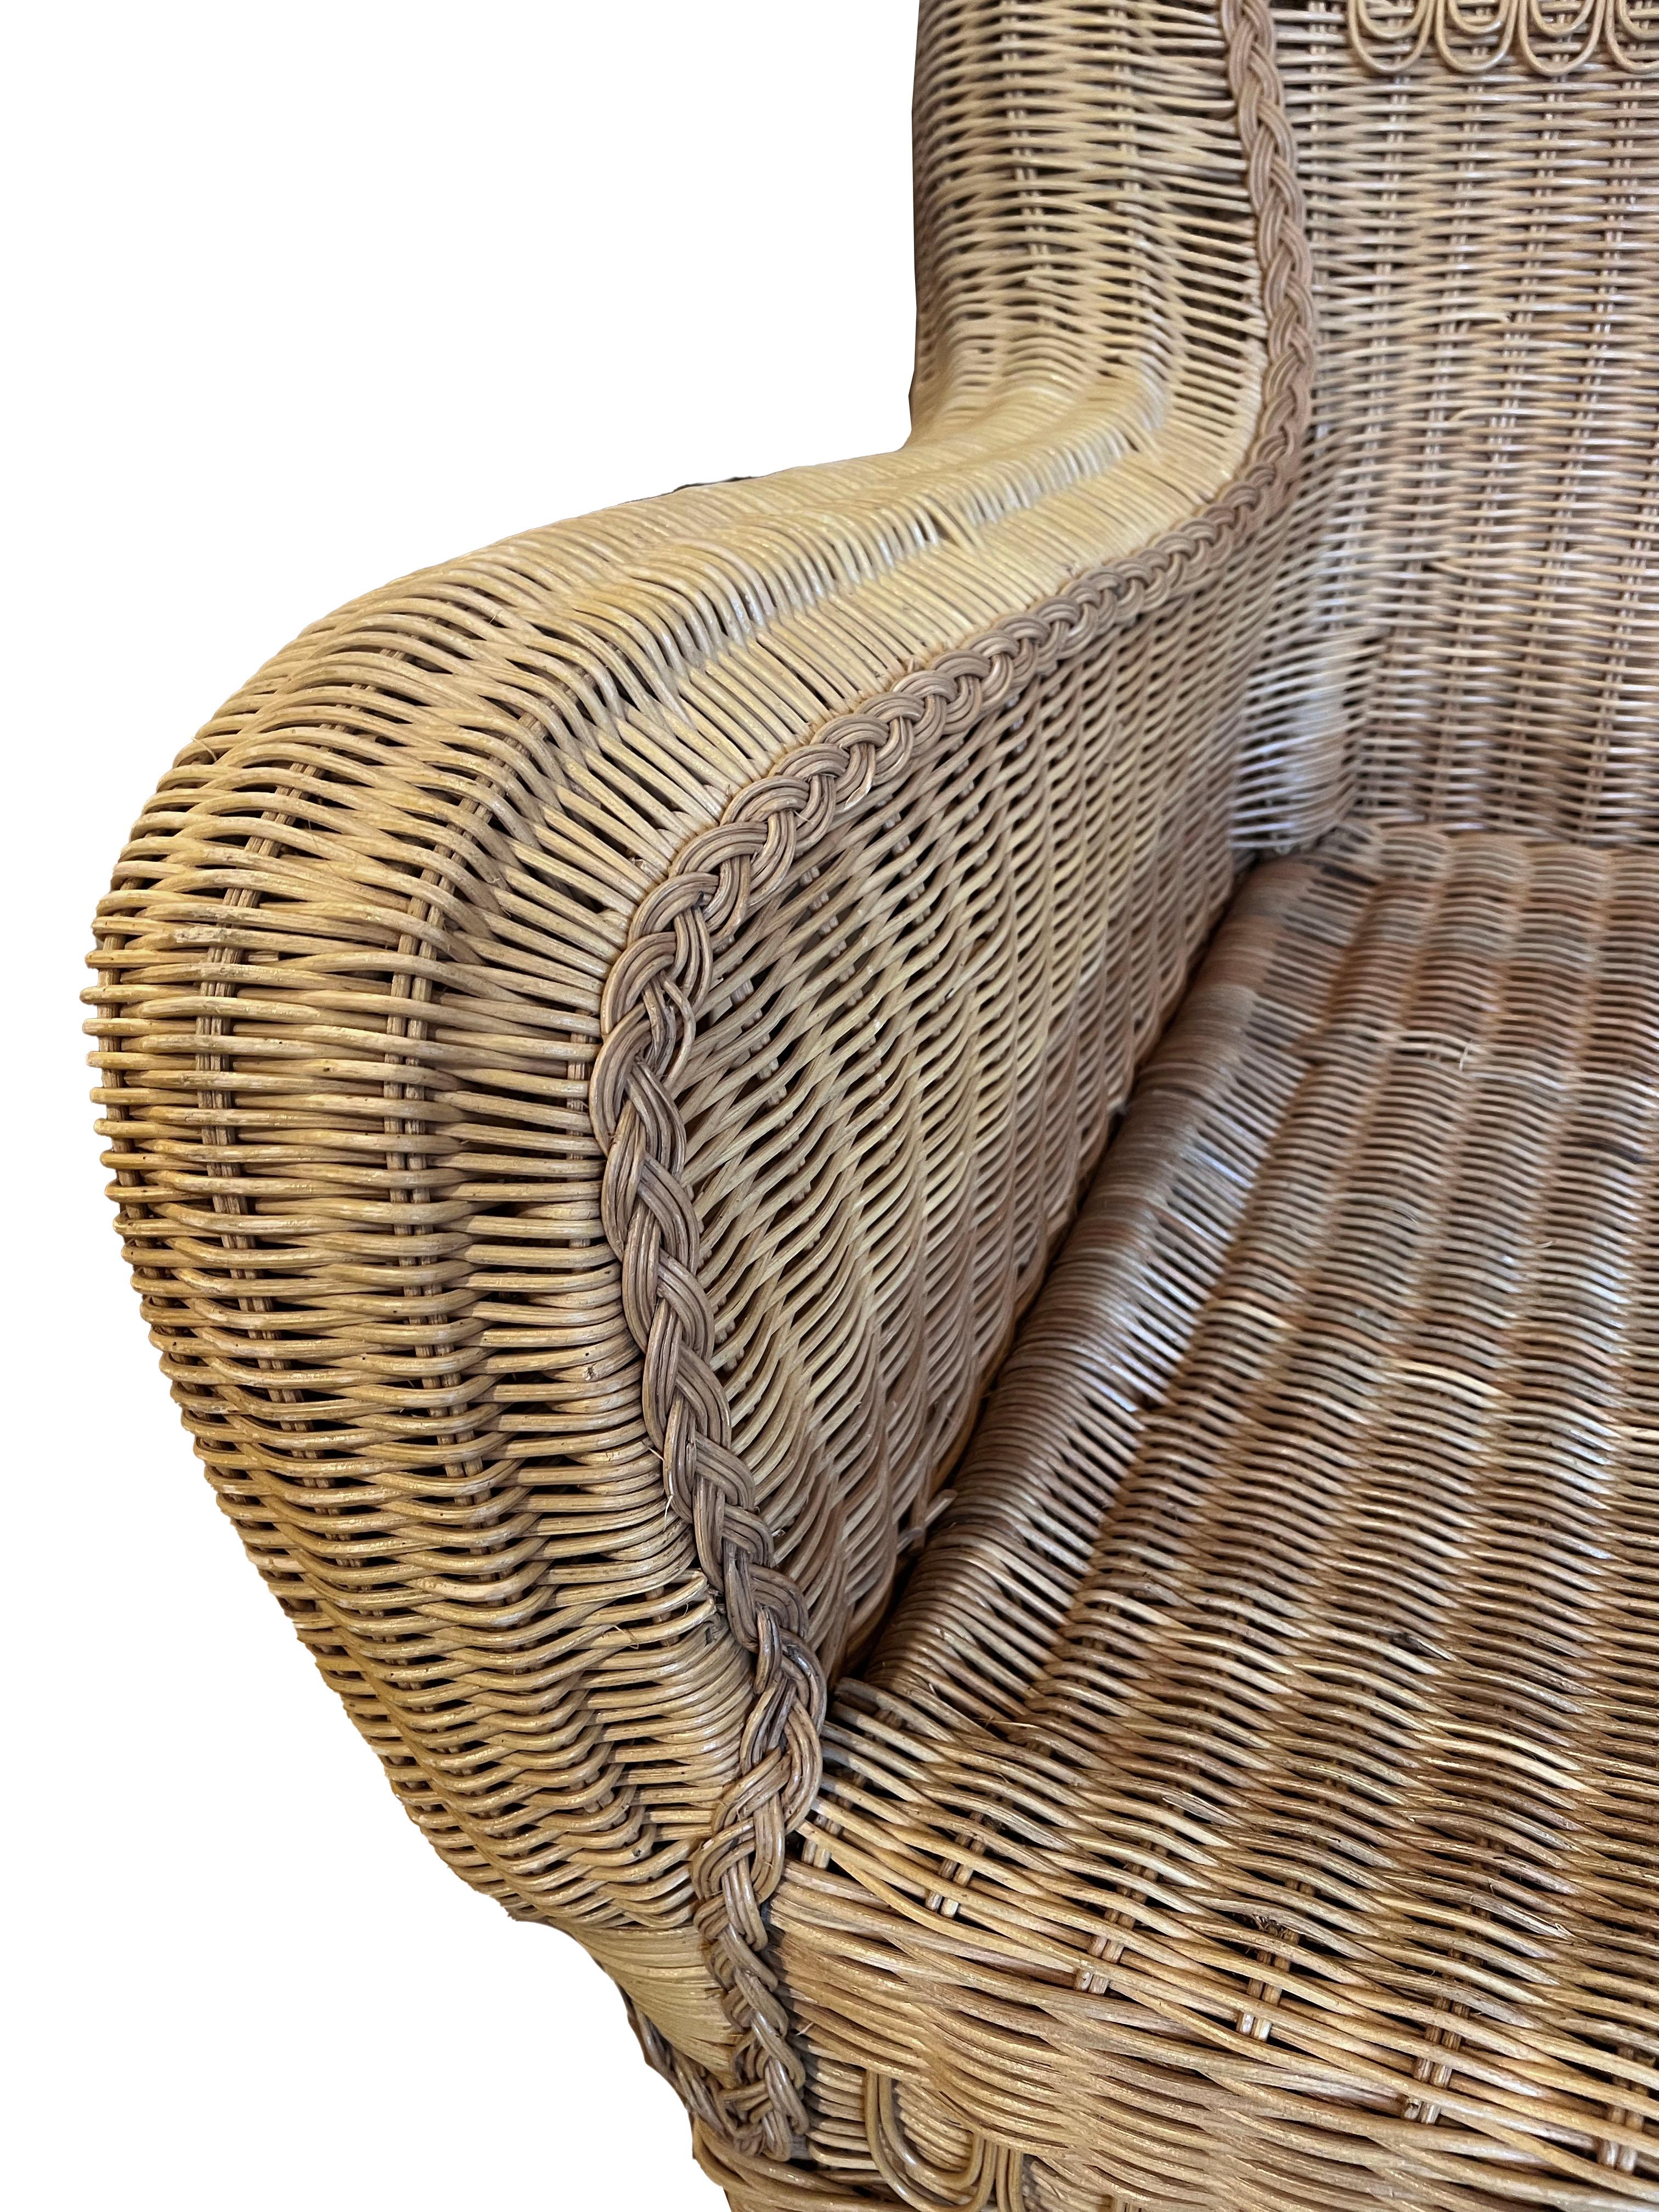 Pair of Large Wicker Armchairs; The Collection of Andre Leon Talley In Good Condition For Sale In Scottsdale, AZ